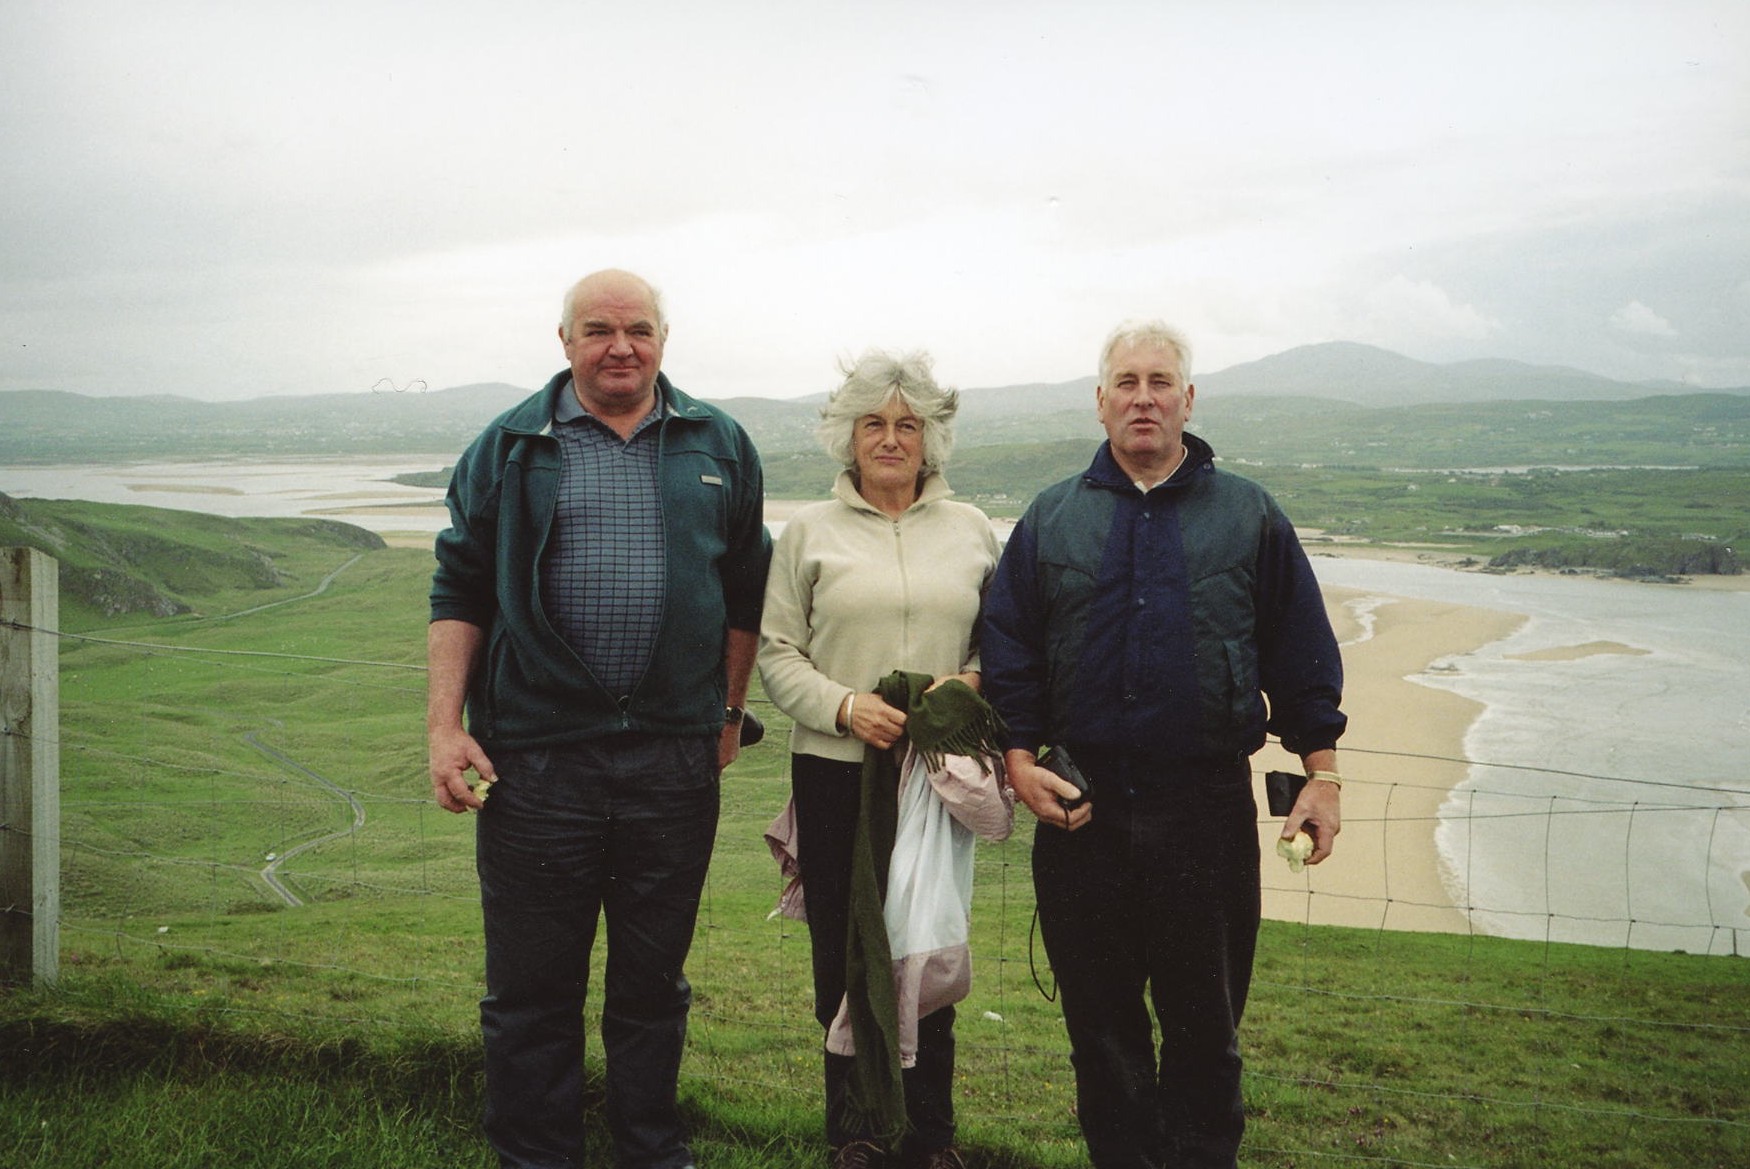 Ballyliffin, County Donegal